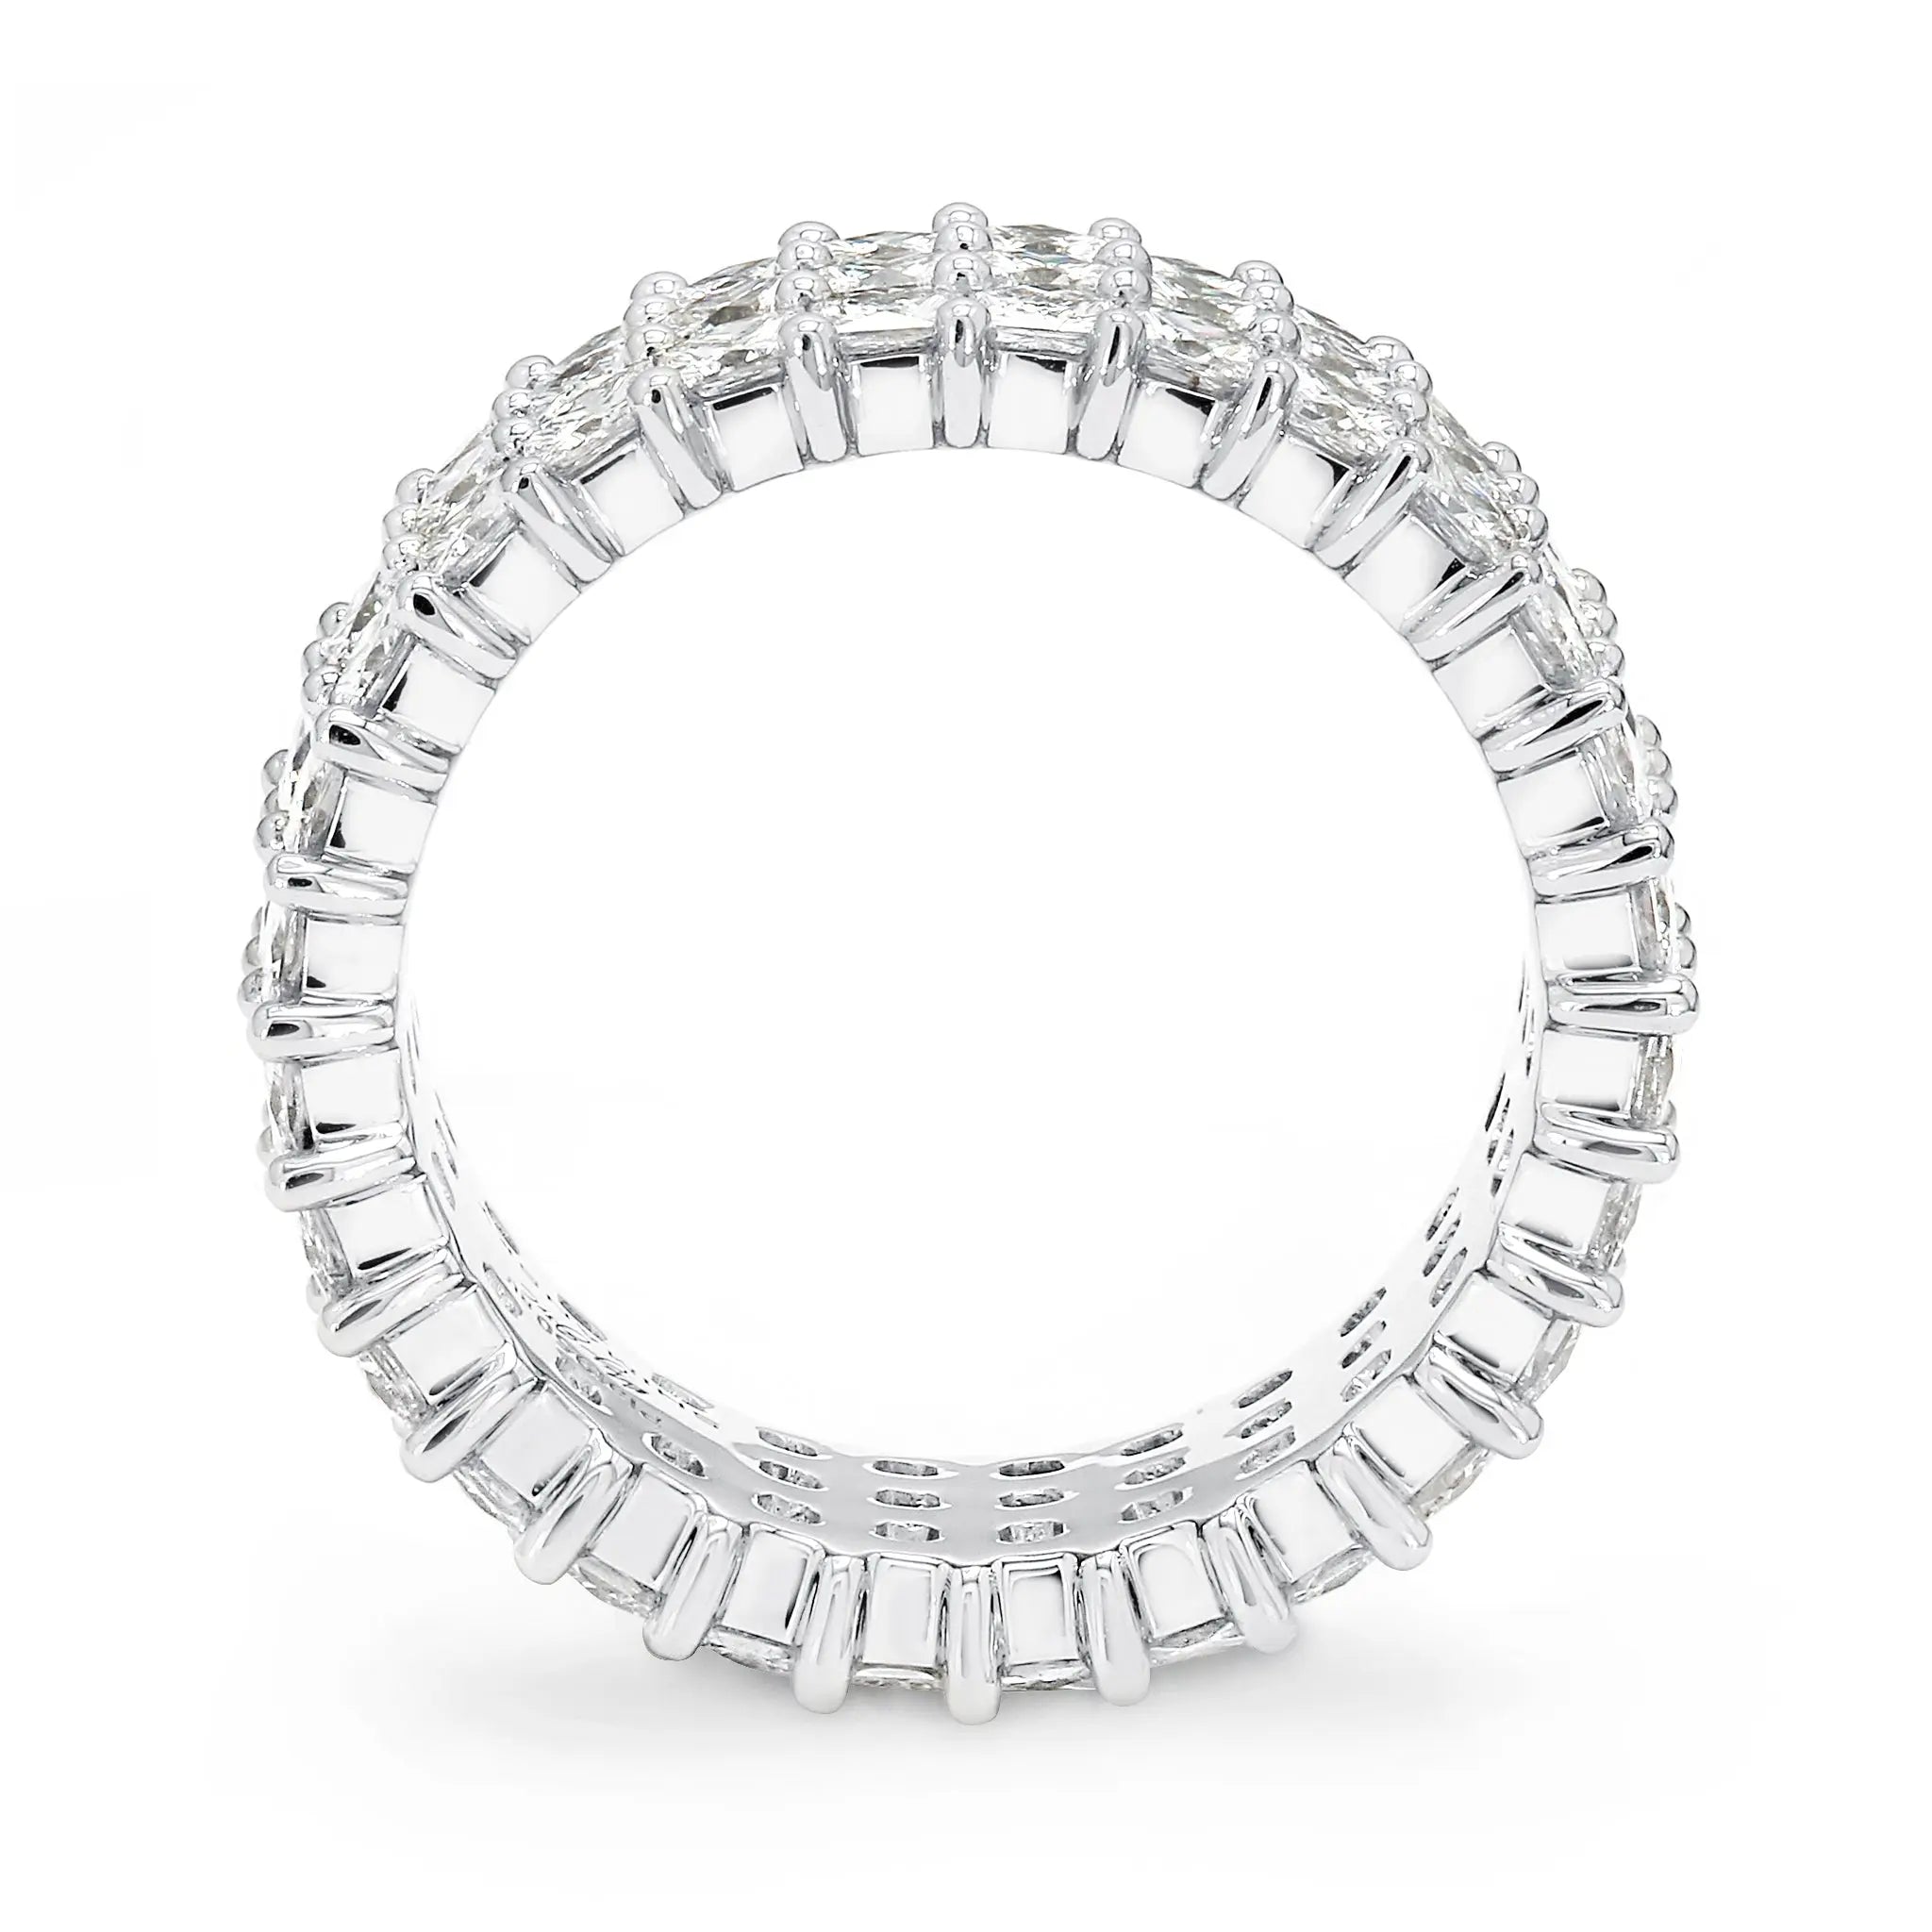 Shimansky - My Girl Claw set 3 Row Full Eternity Diamond Ring 5.00ct Crafted in 18K White Gold